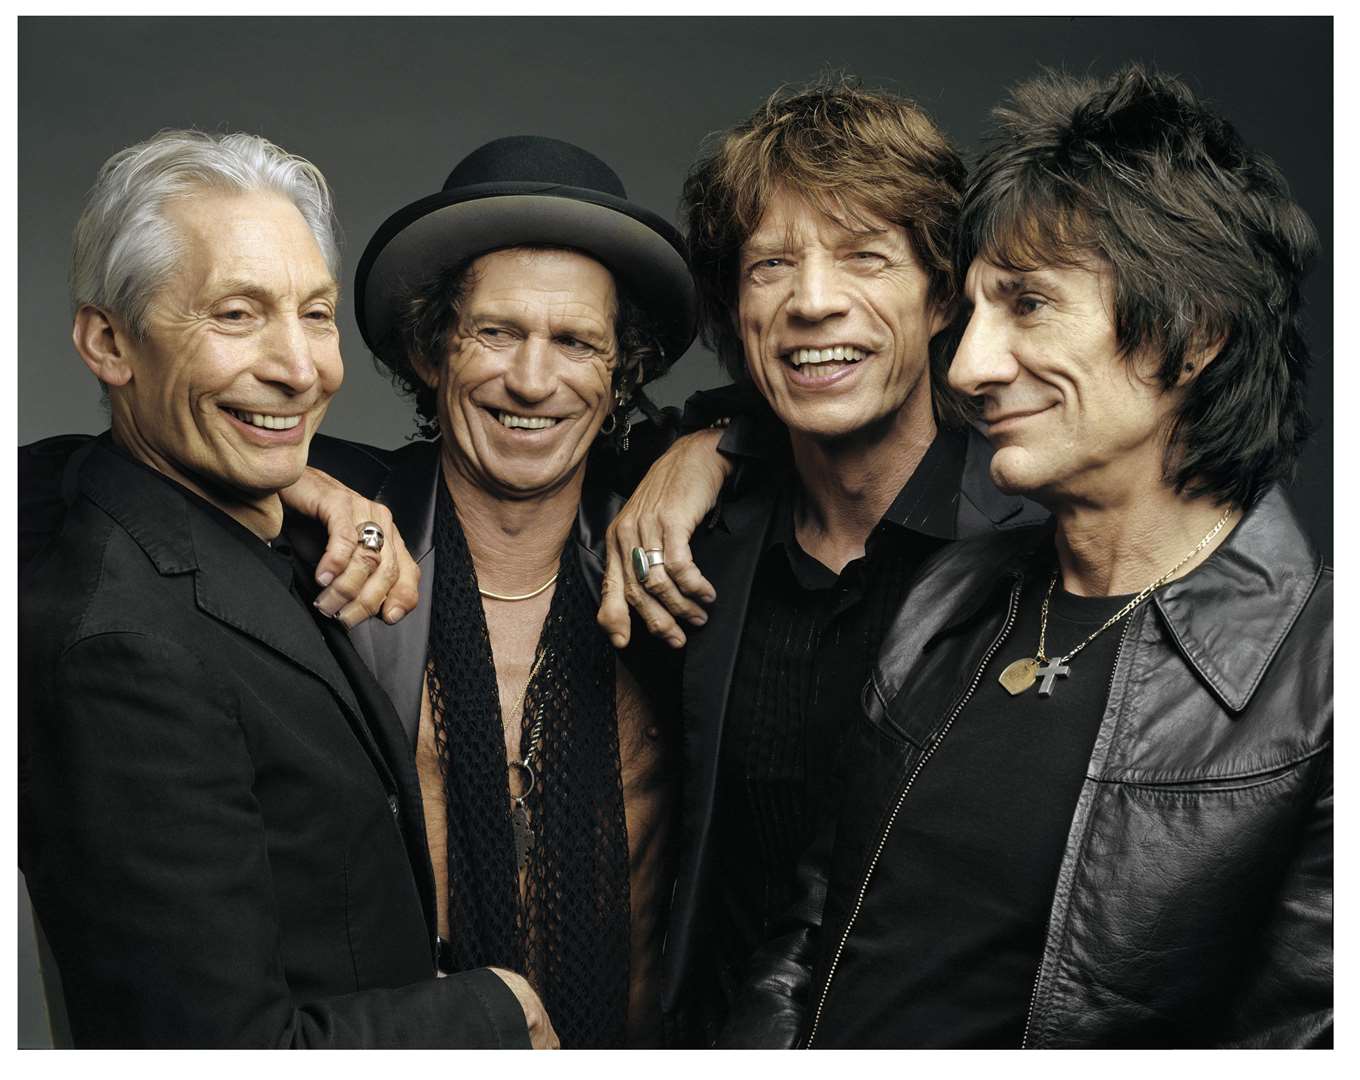 The Rolling Stones released new music this year. Photo: Rebecca Gibbs